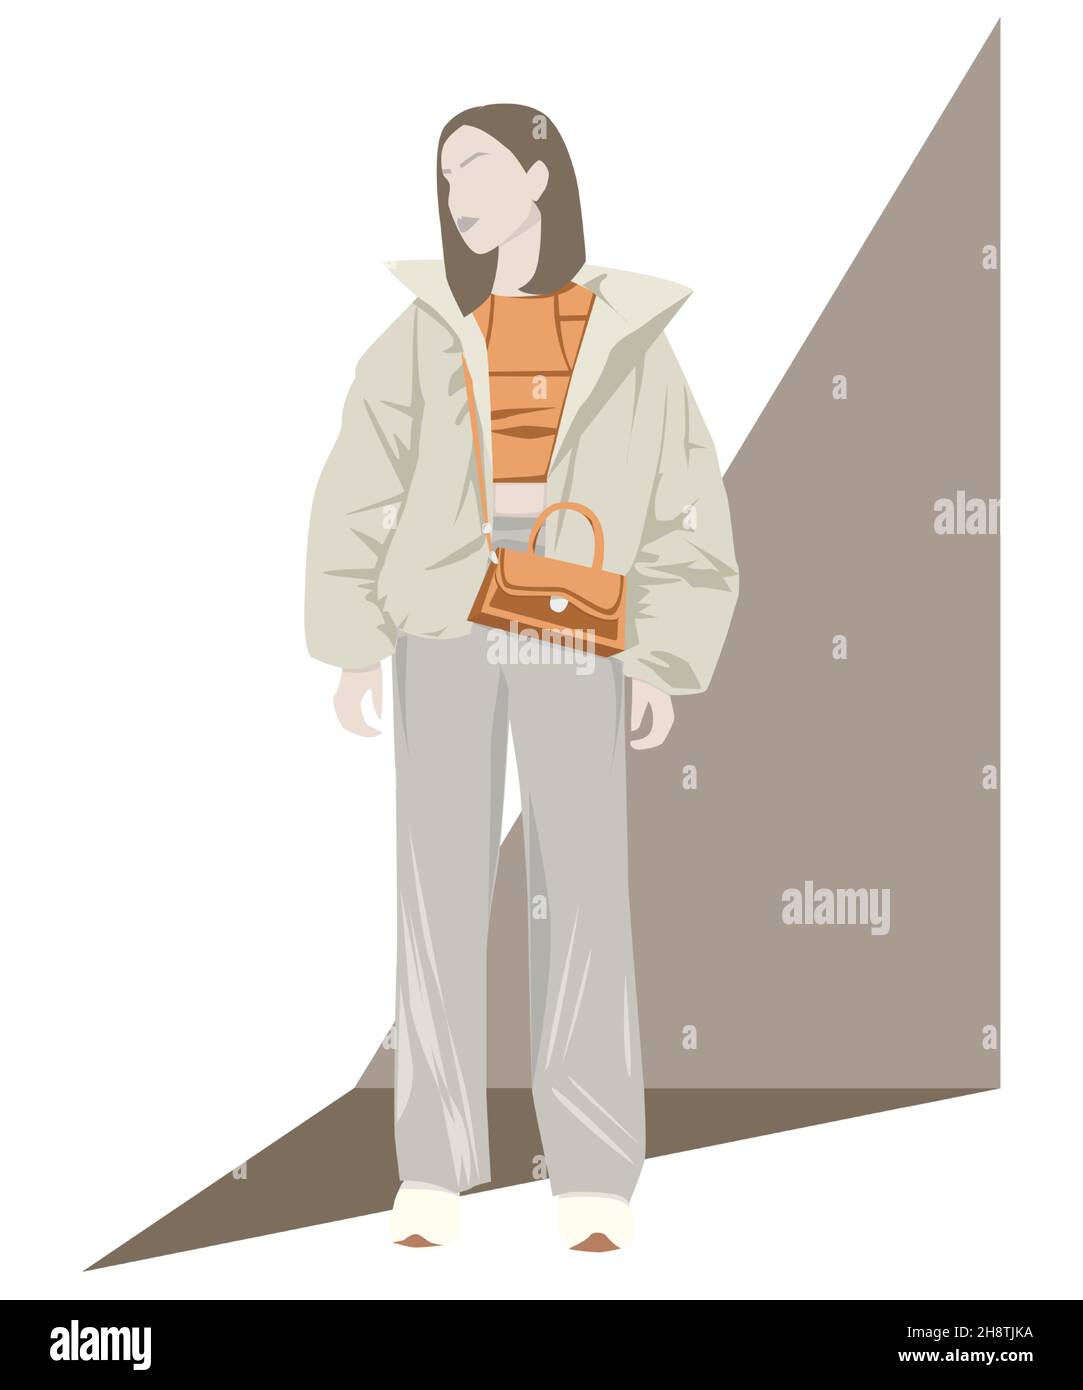 Street style fashion woman in winter outfit Stock Vector